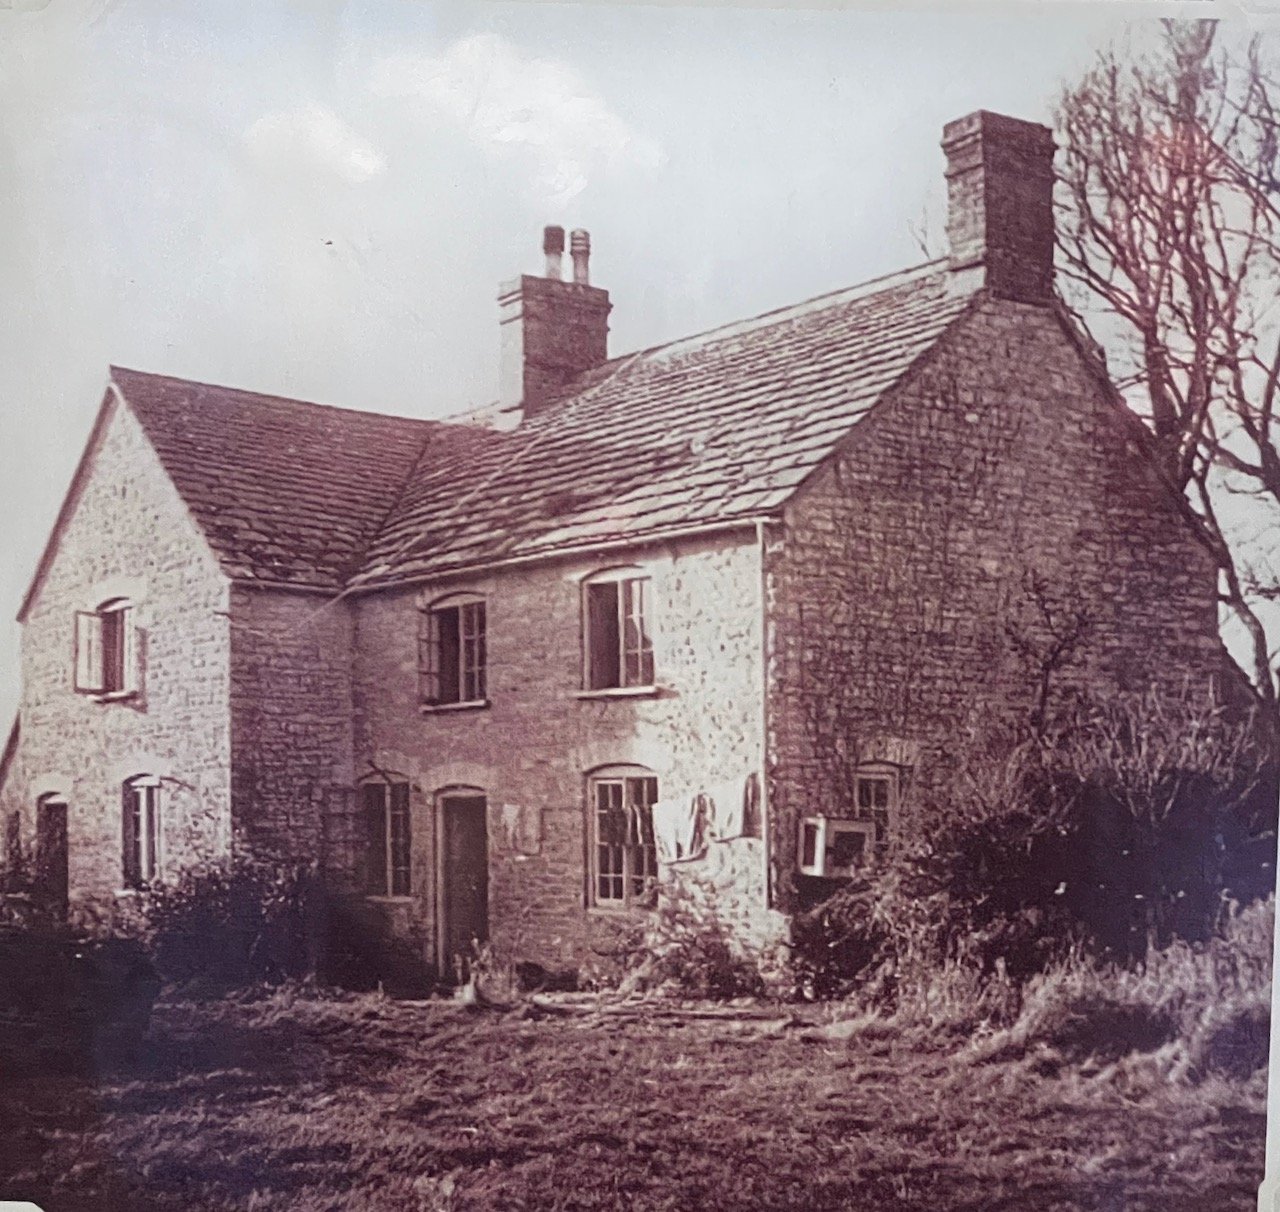 Gwyle Cottage - then